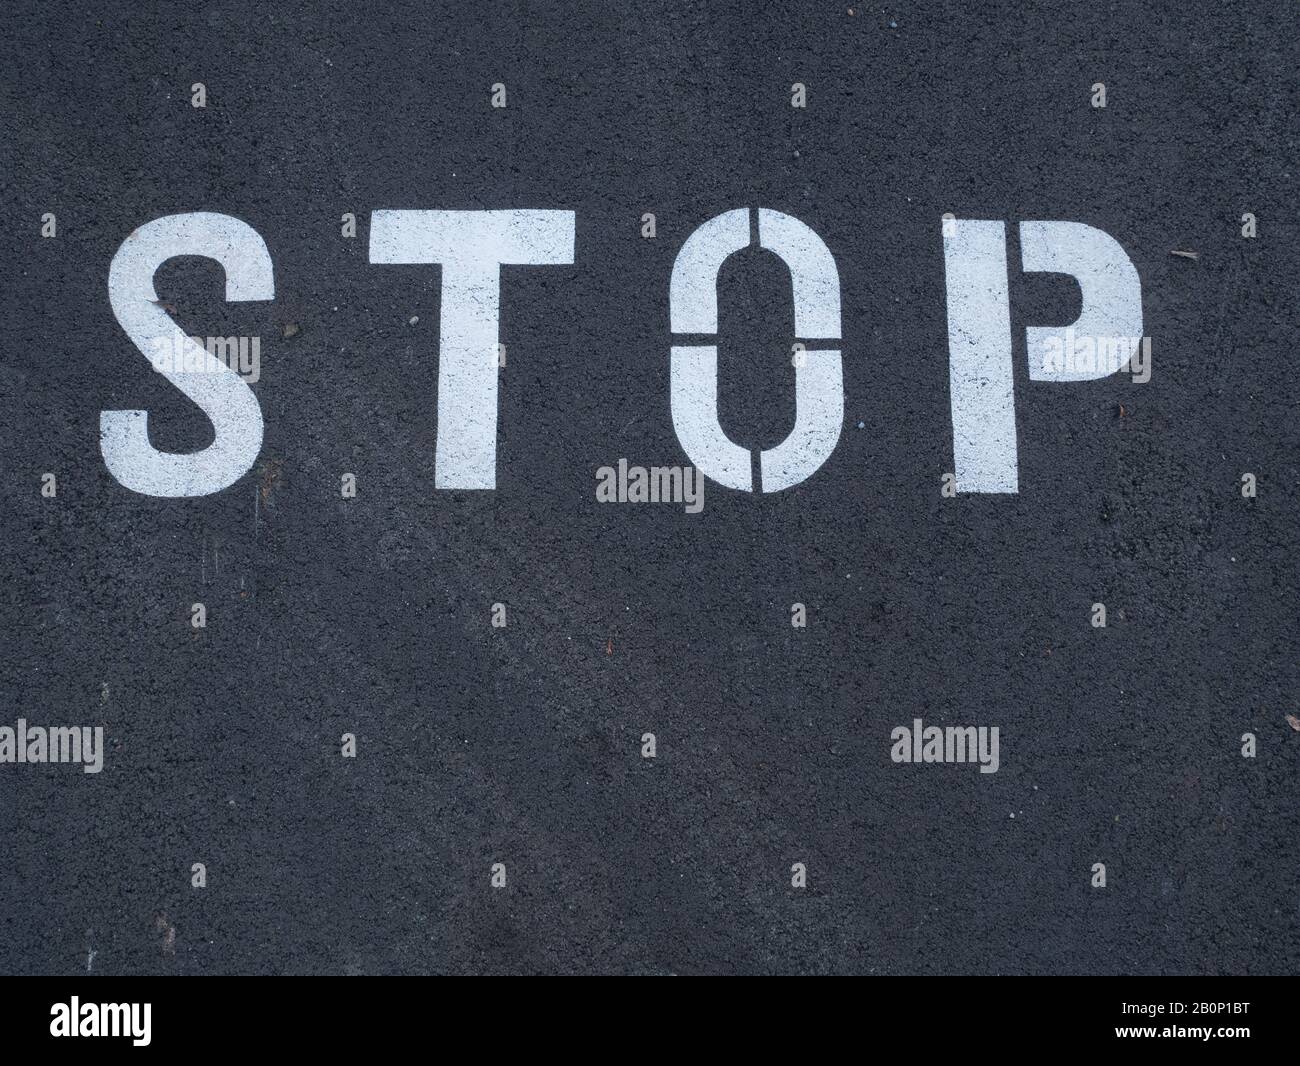 White stop sign painted on dark asphalt. You can see tire tracks over it. Indicates a mandatory stop. Stock Photo